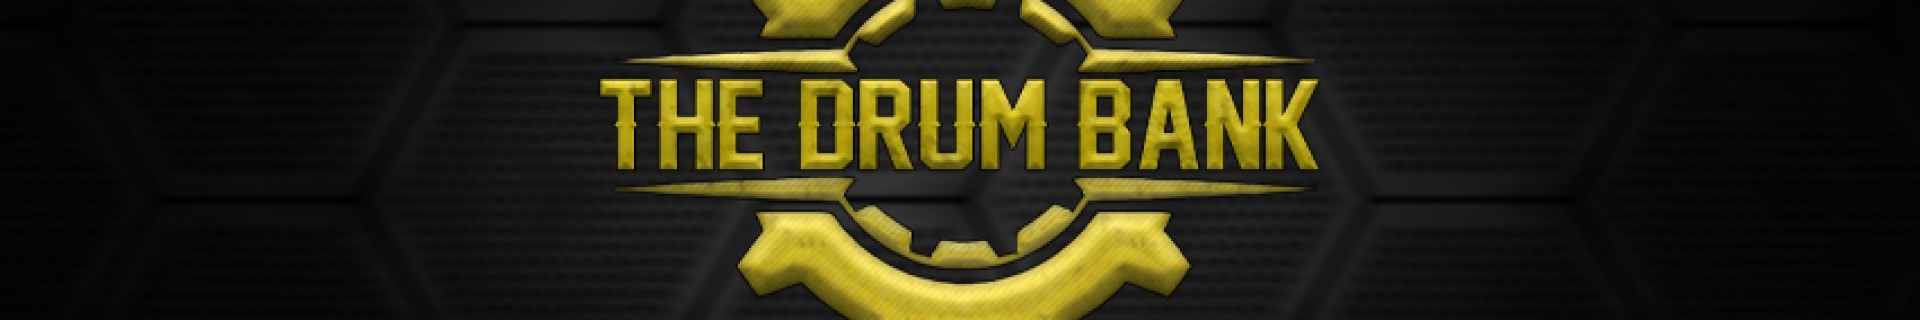 TheDrumBank profile cover